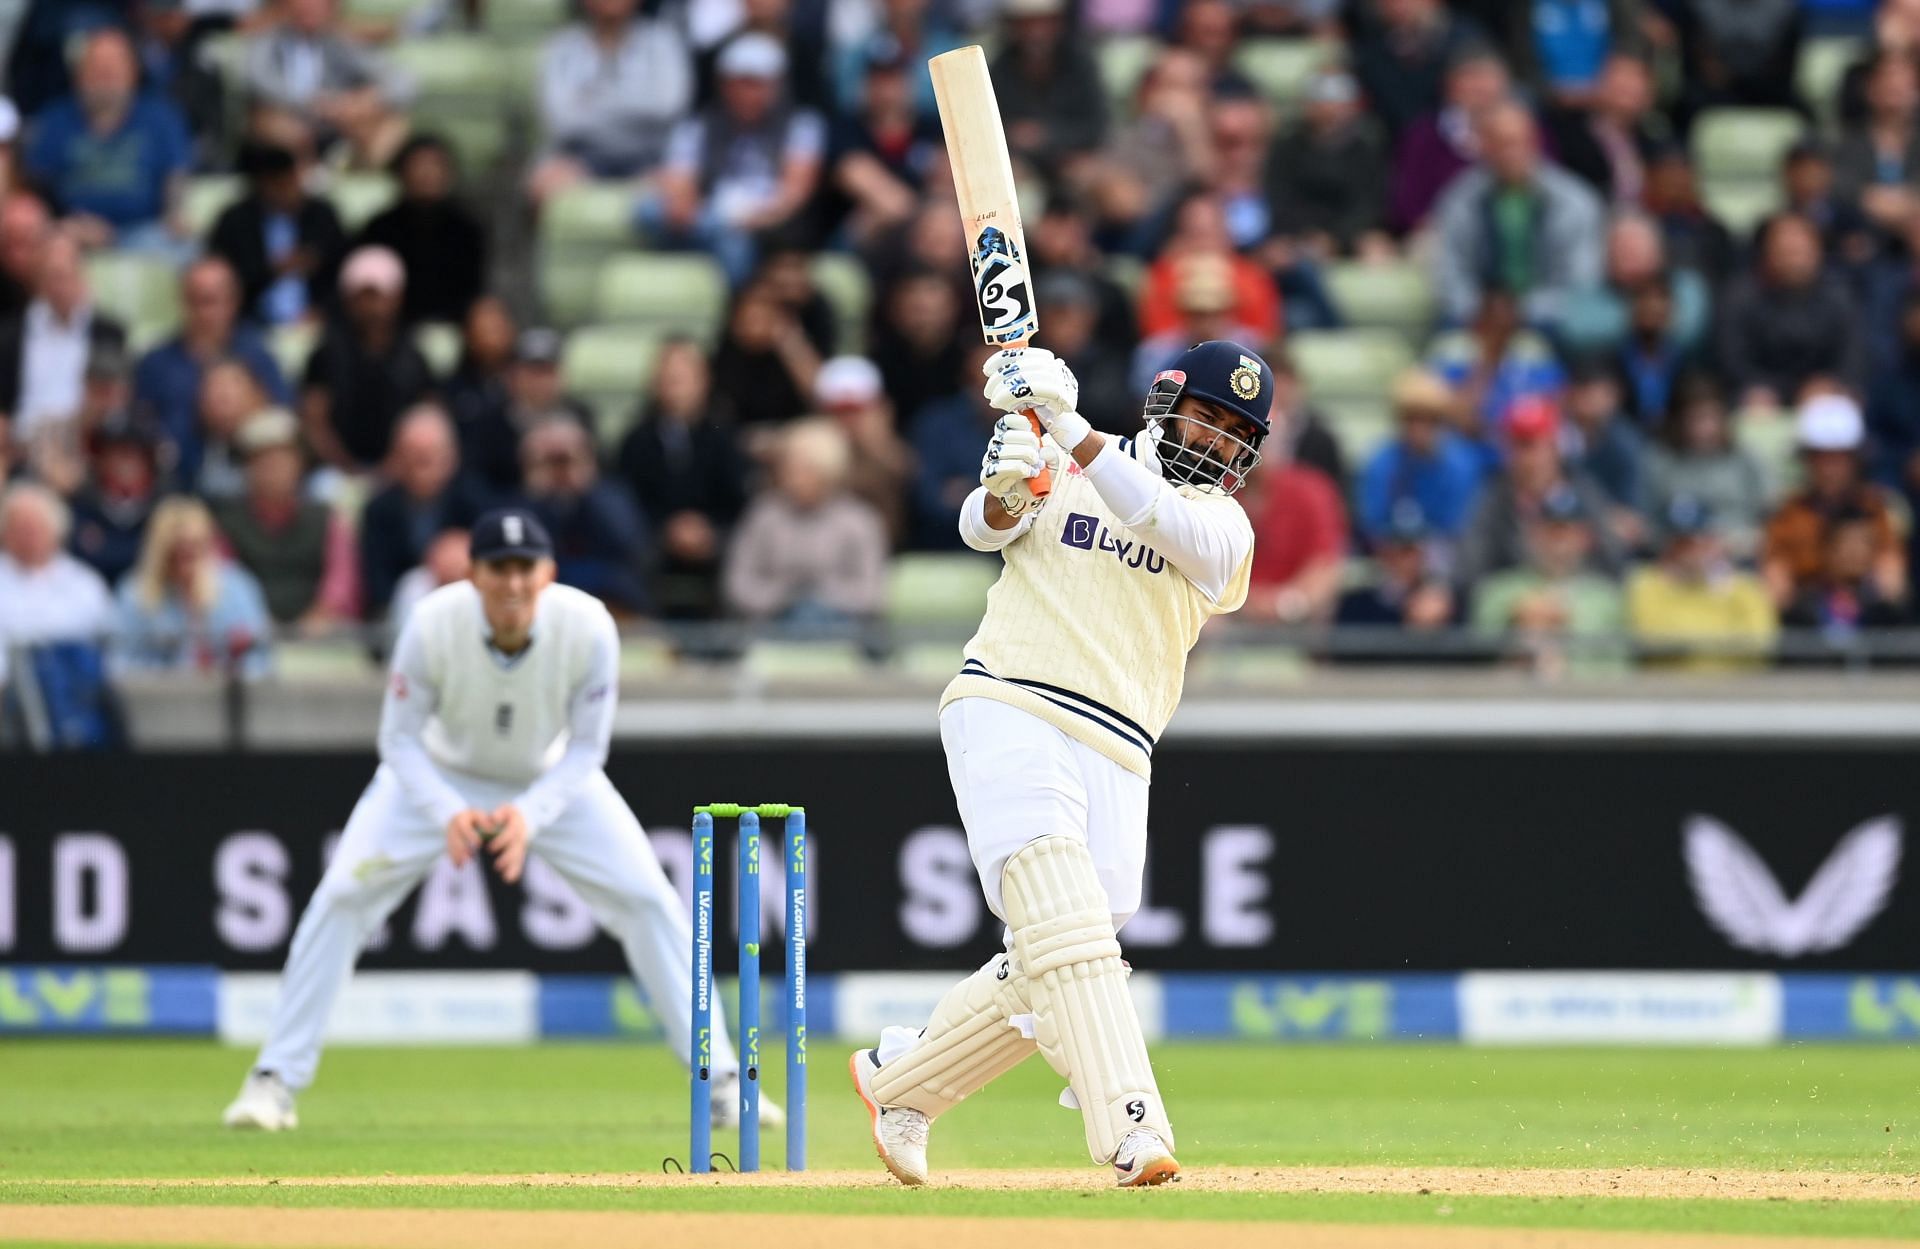 Rishabh Pant bats during Day 3 of the fifth Test. Pic: Getty Images